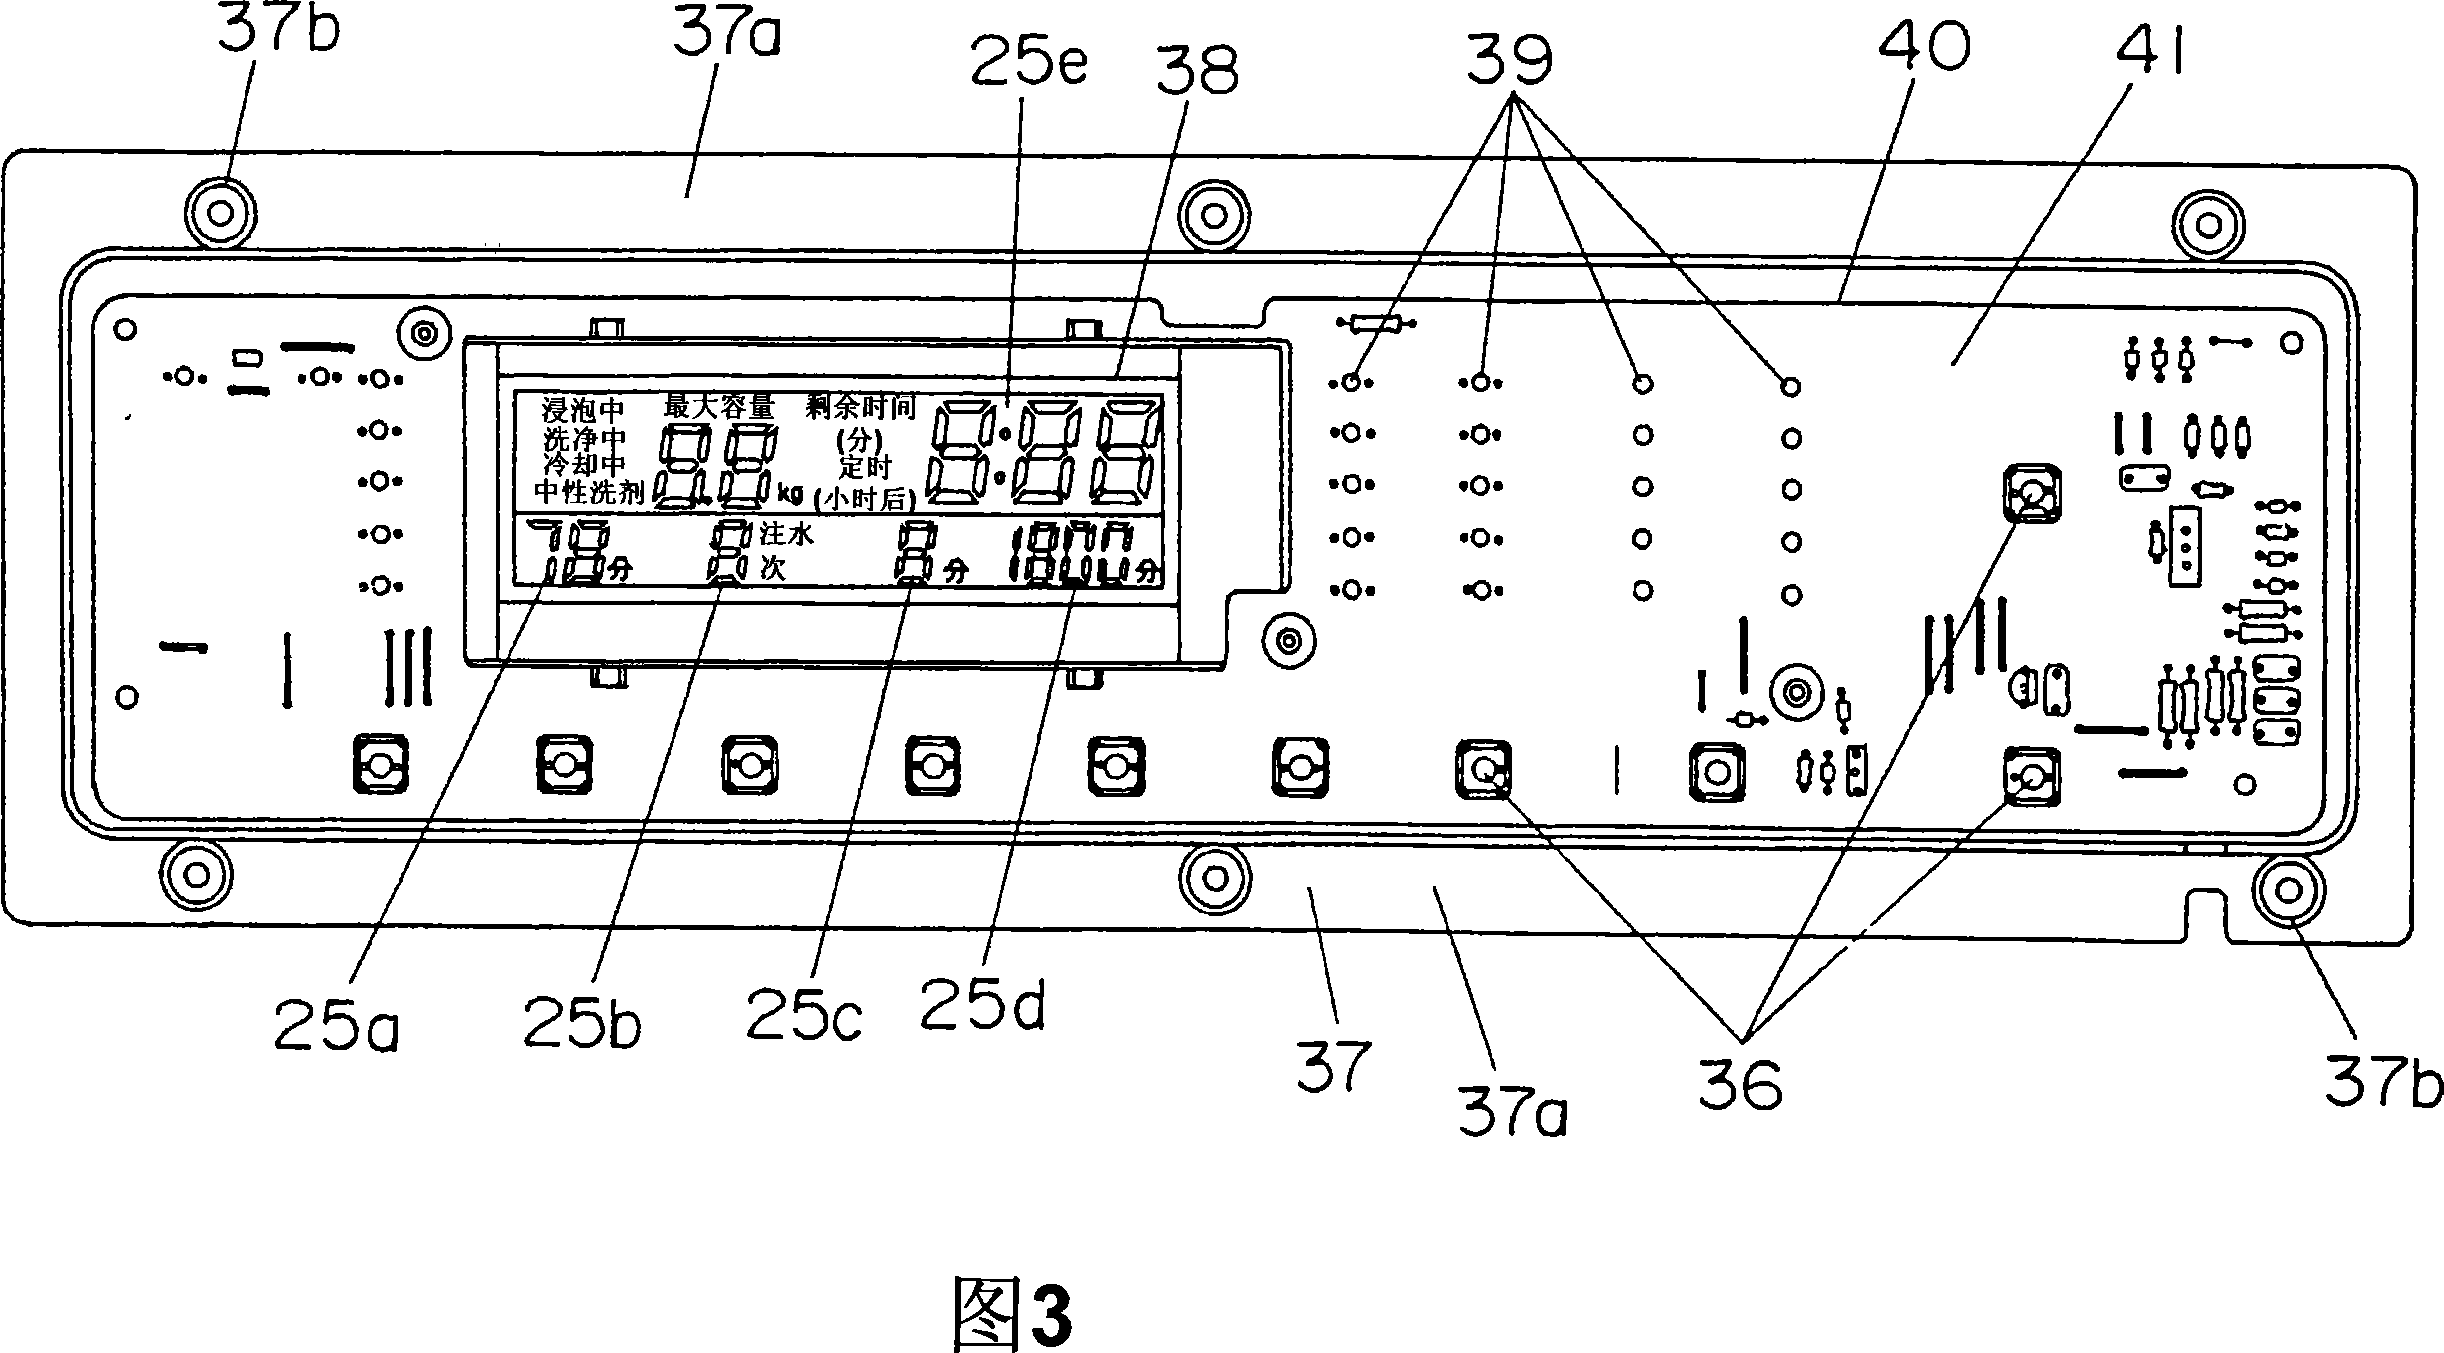 Operation display device